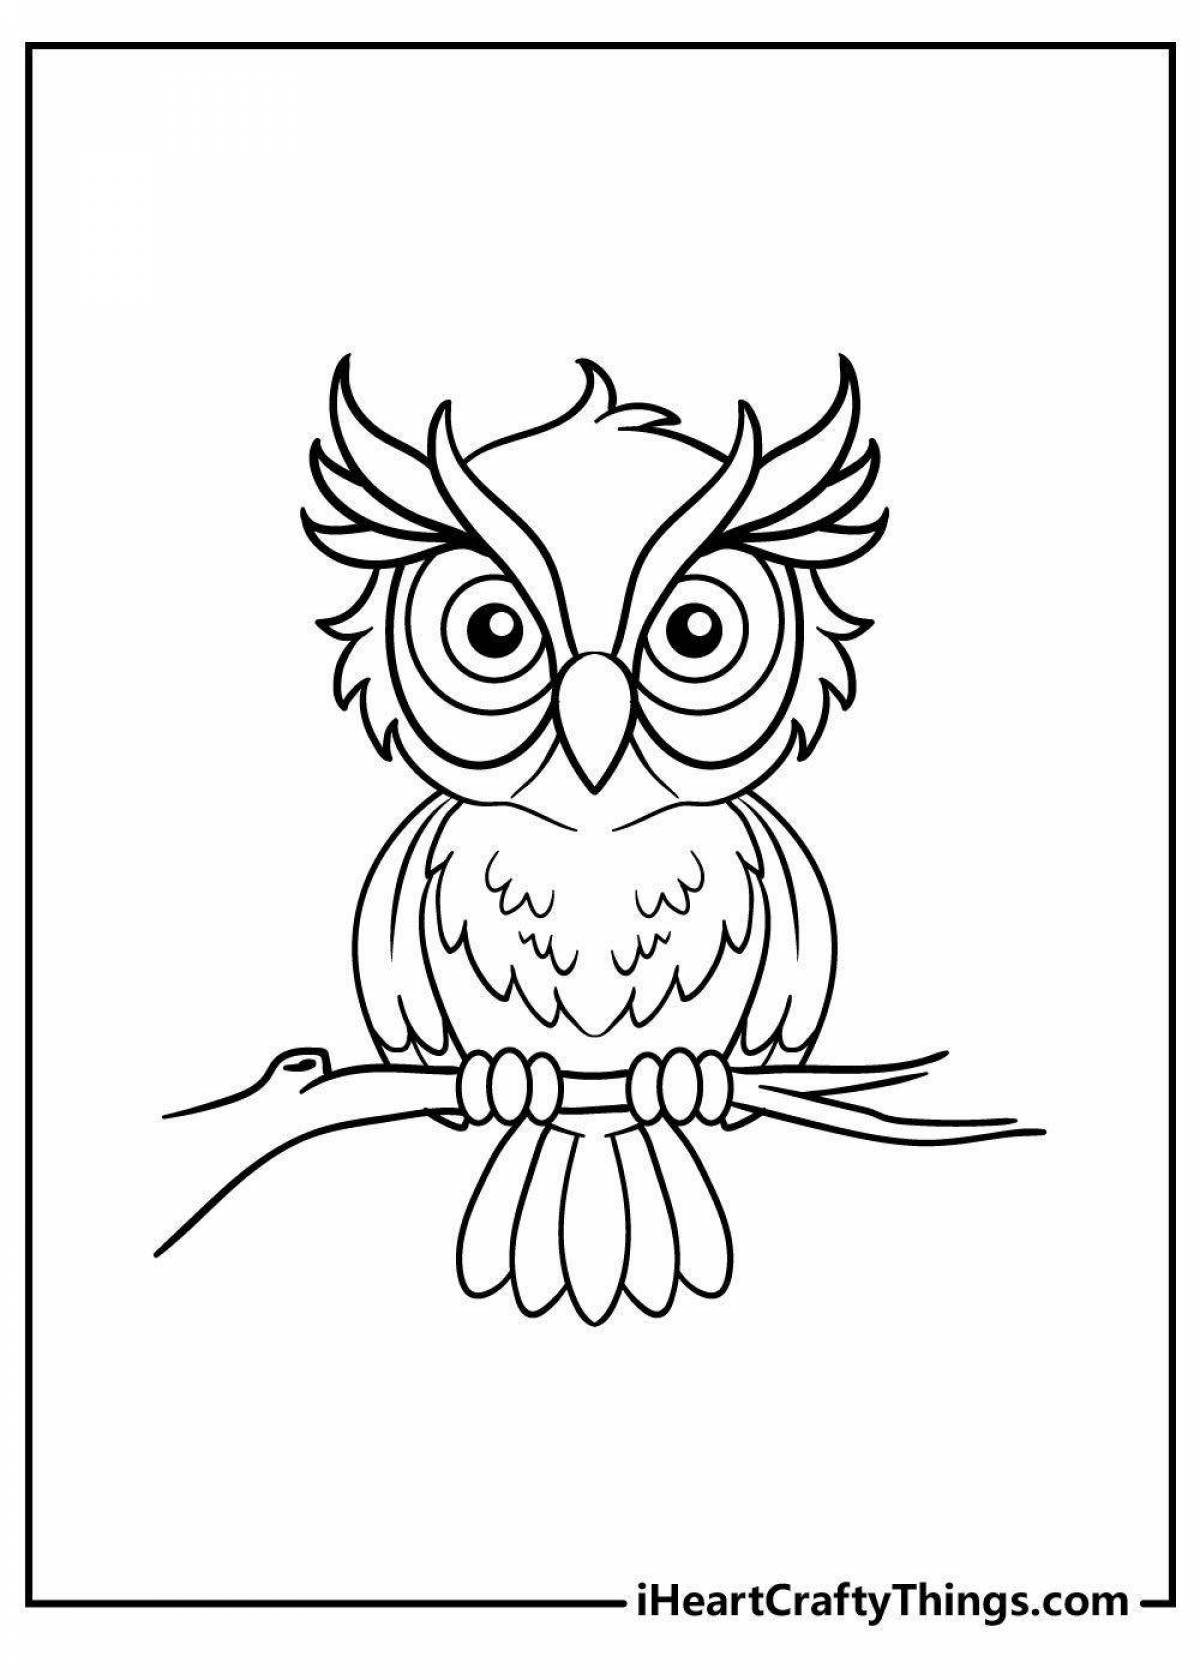 Creative owl coloring page for 6-7 year olds